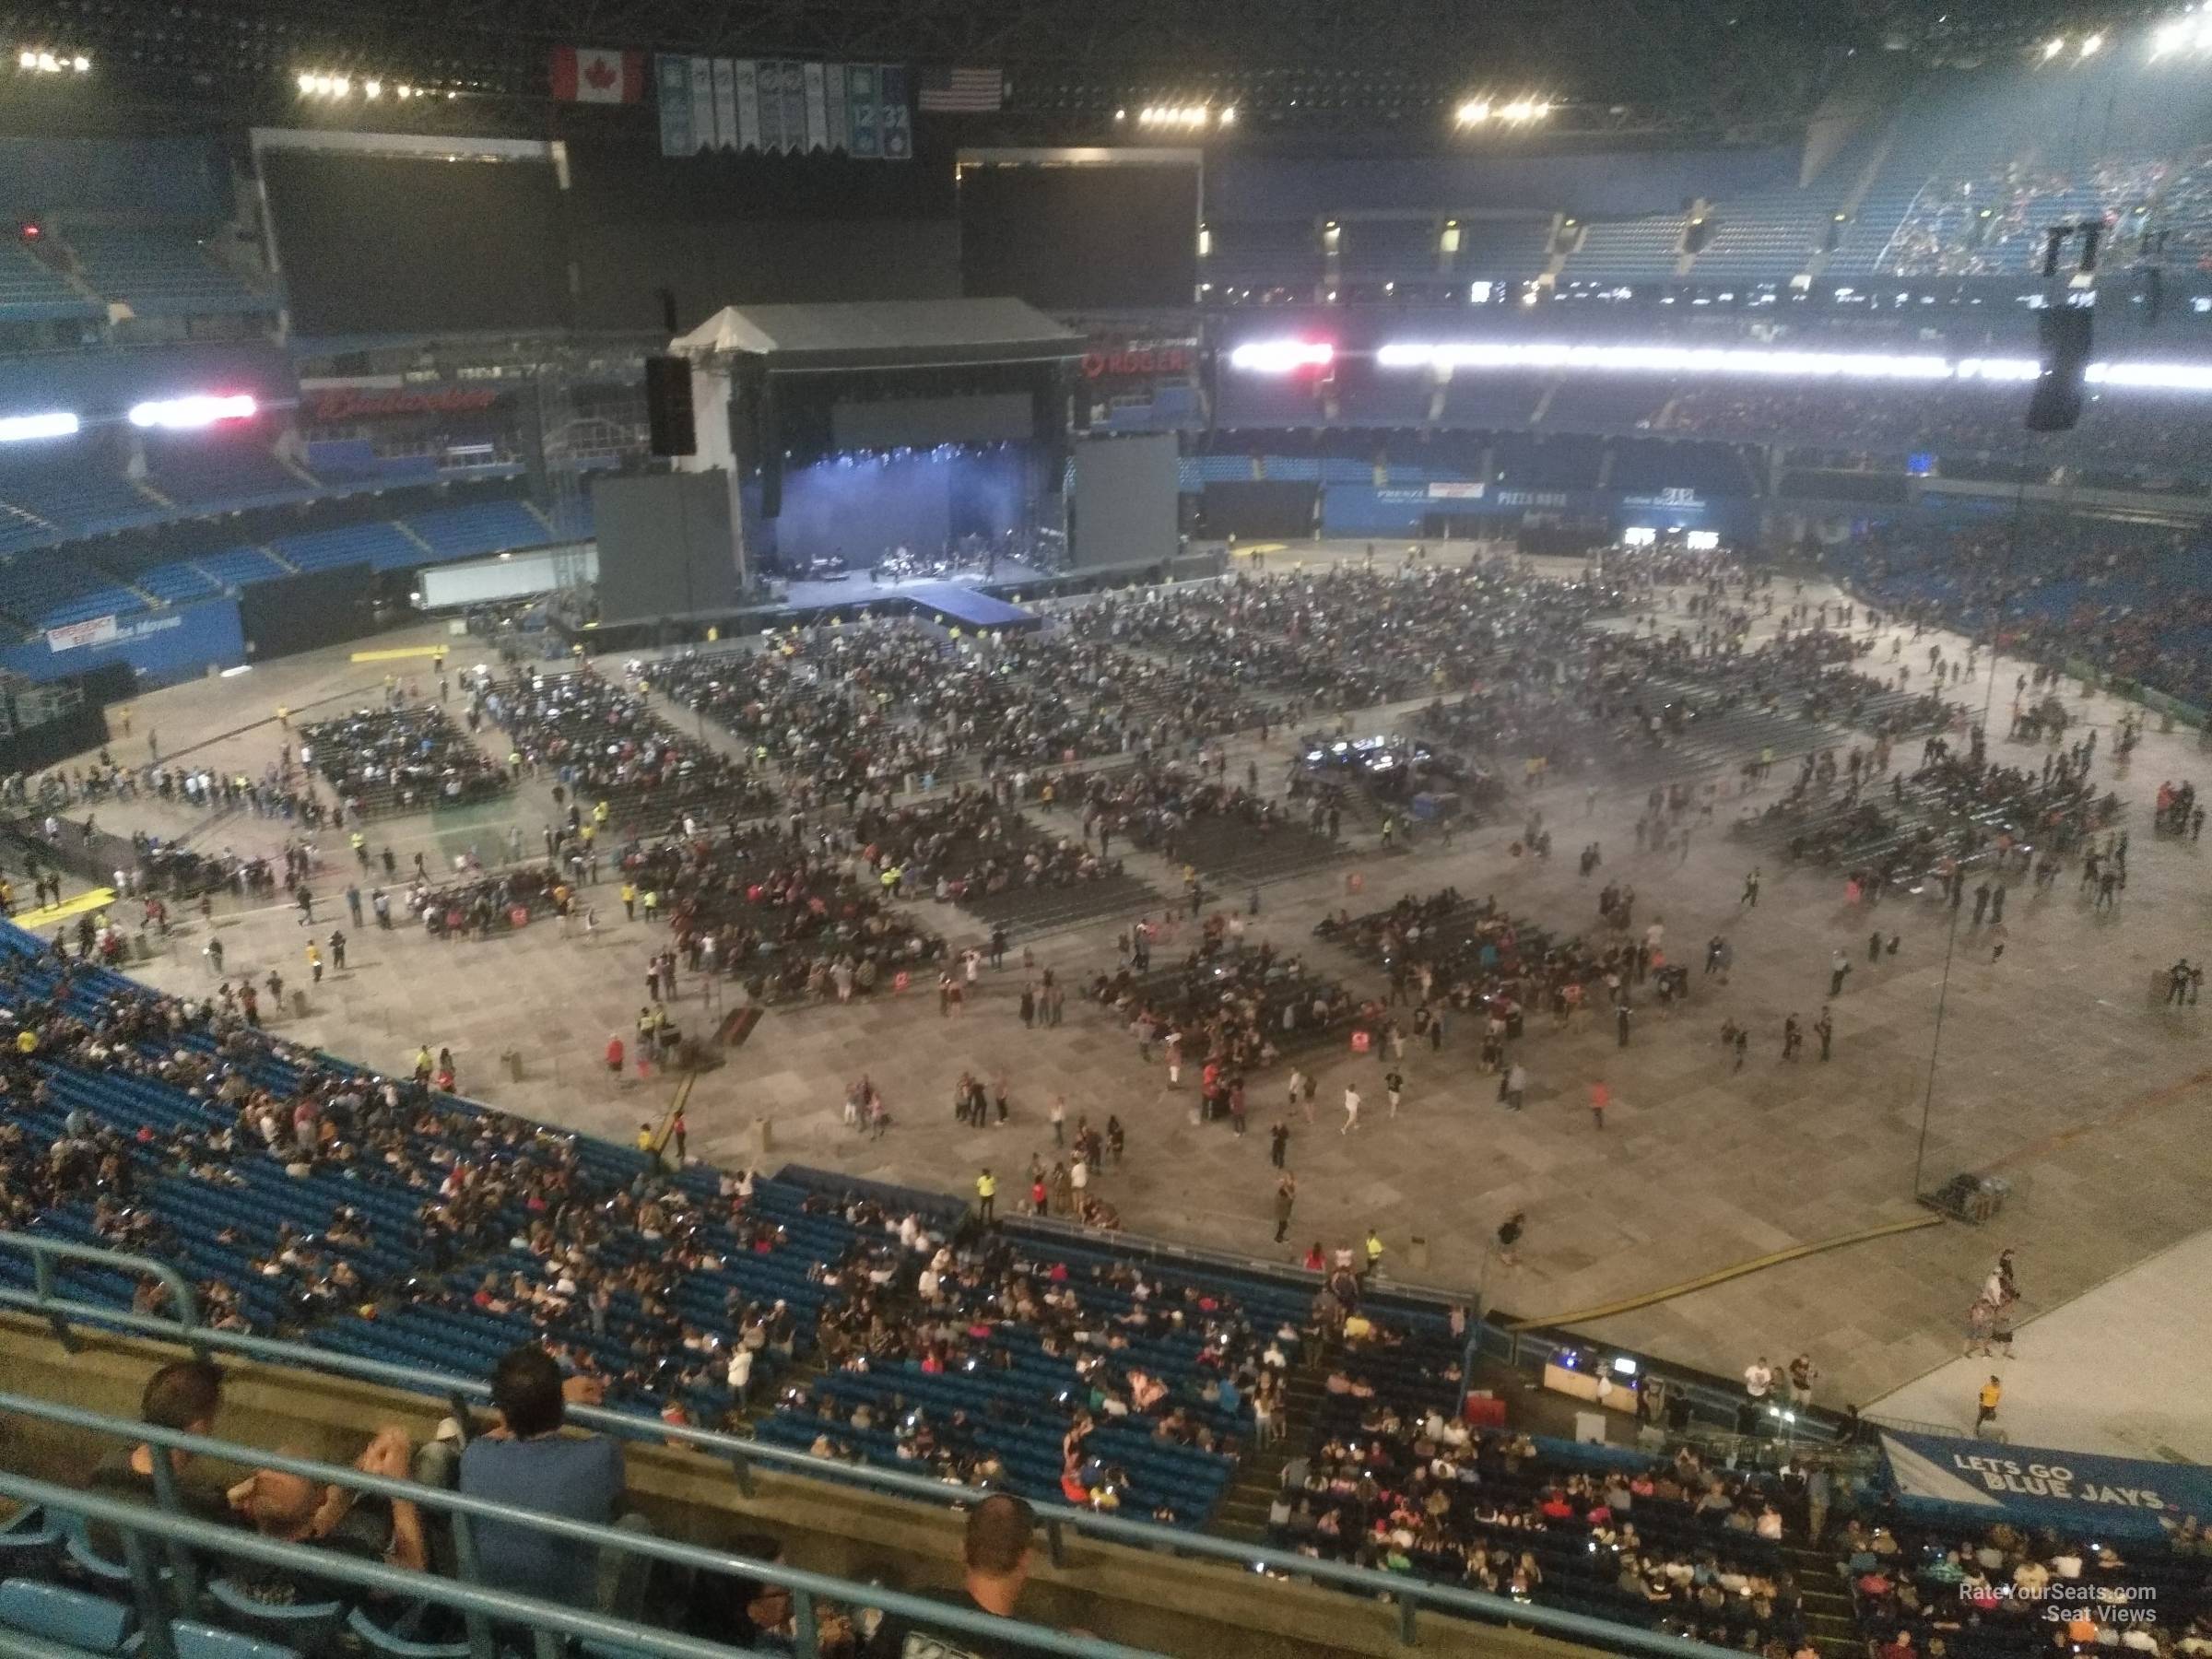 section 529, row 5 seat view  for concert - rogers centre